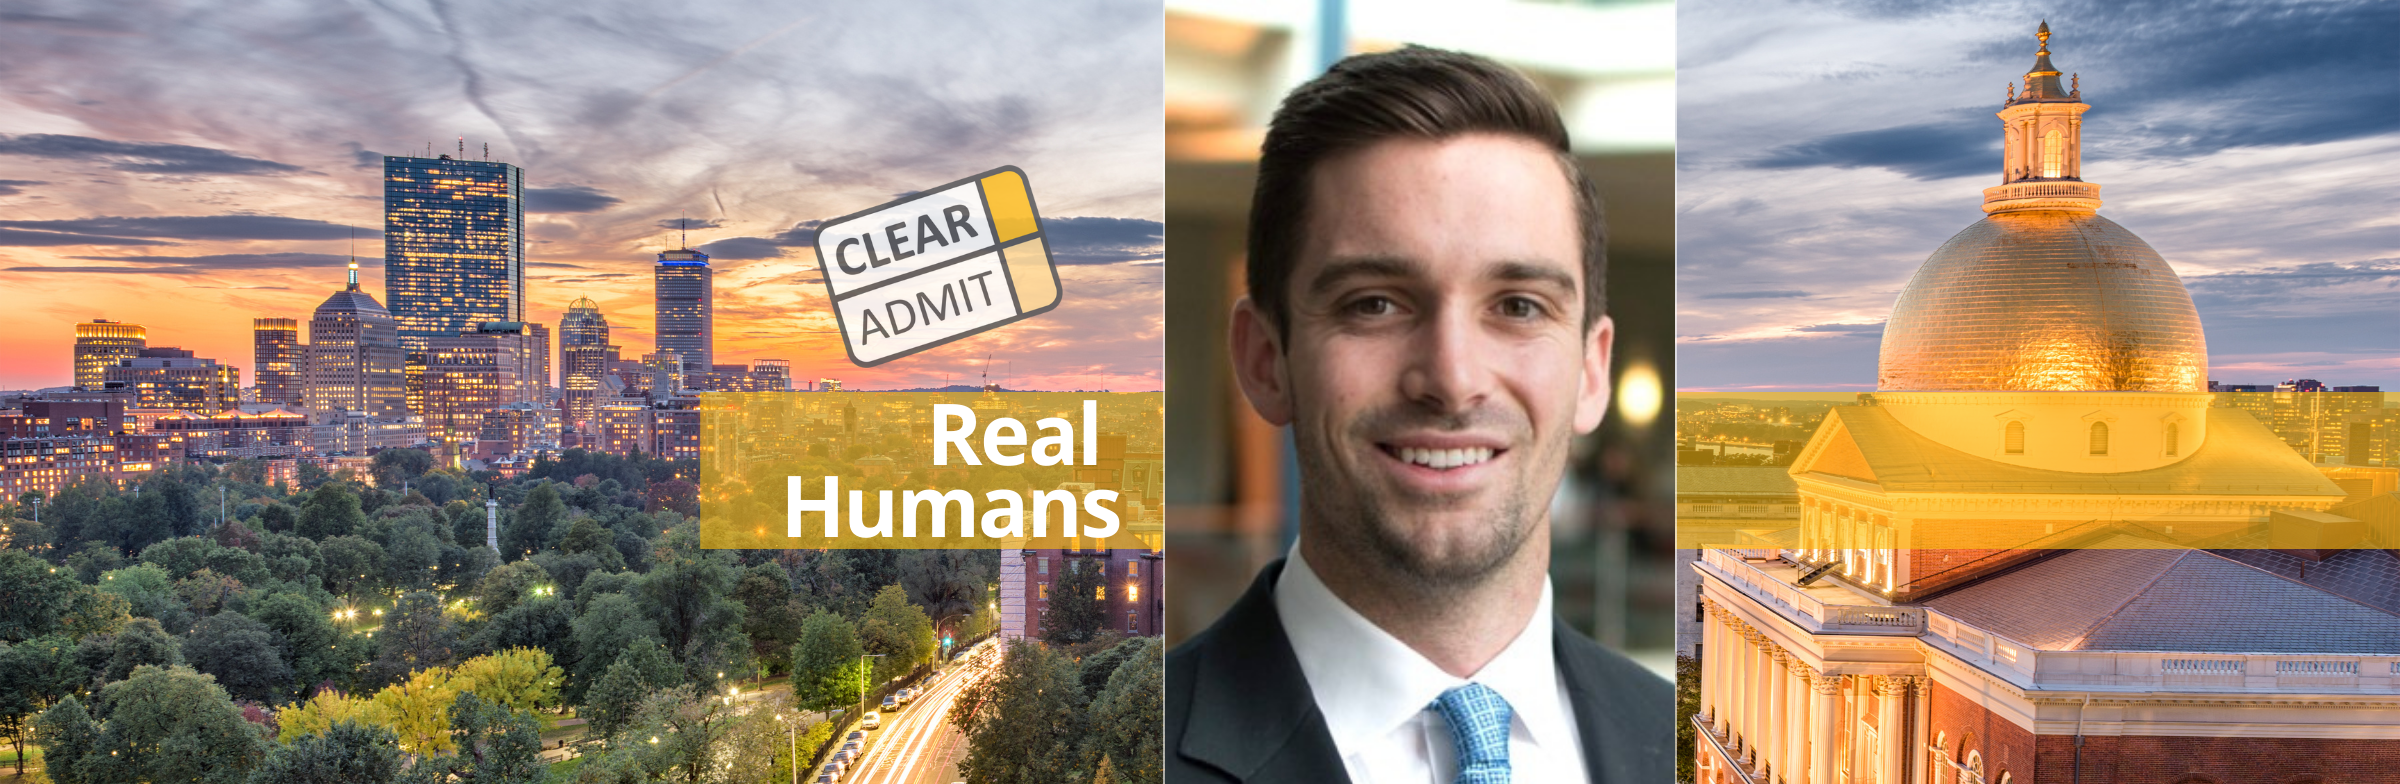 Image for Real Humans of BCG: Steve Neumann, Georgetown McDonough MBA’ 2019, Project Leader